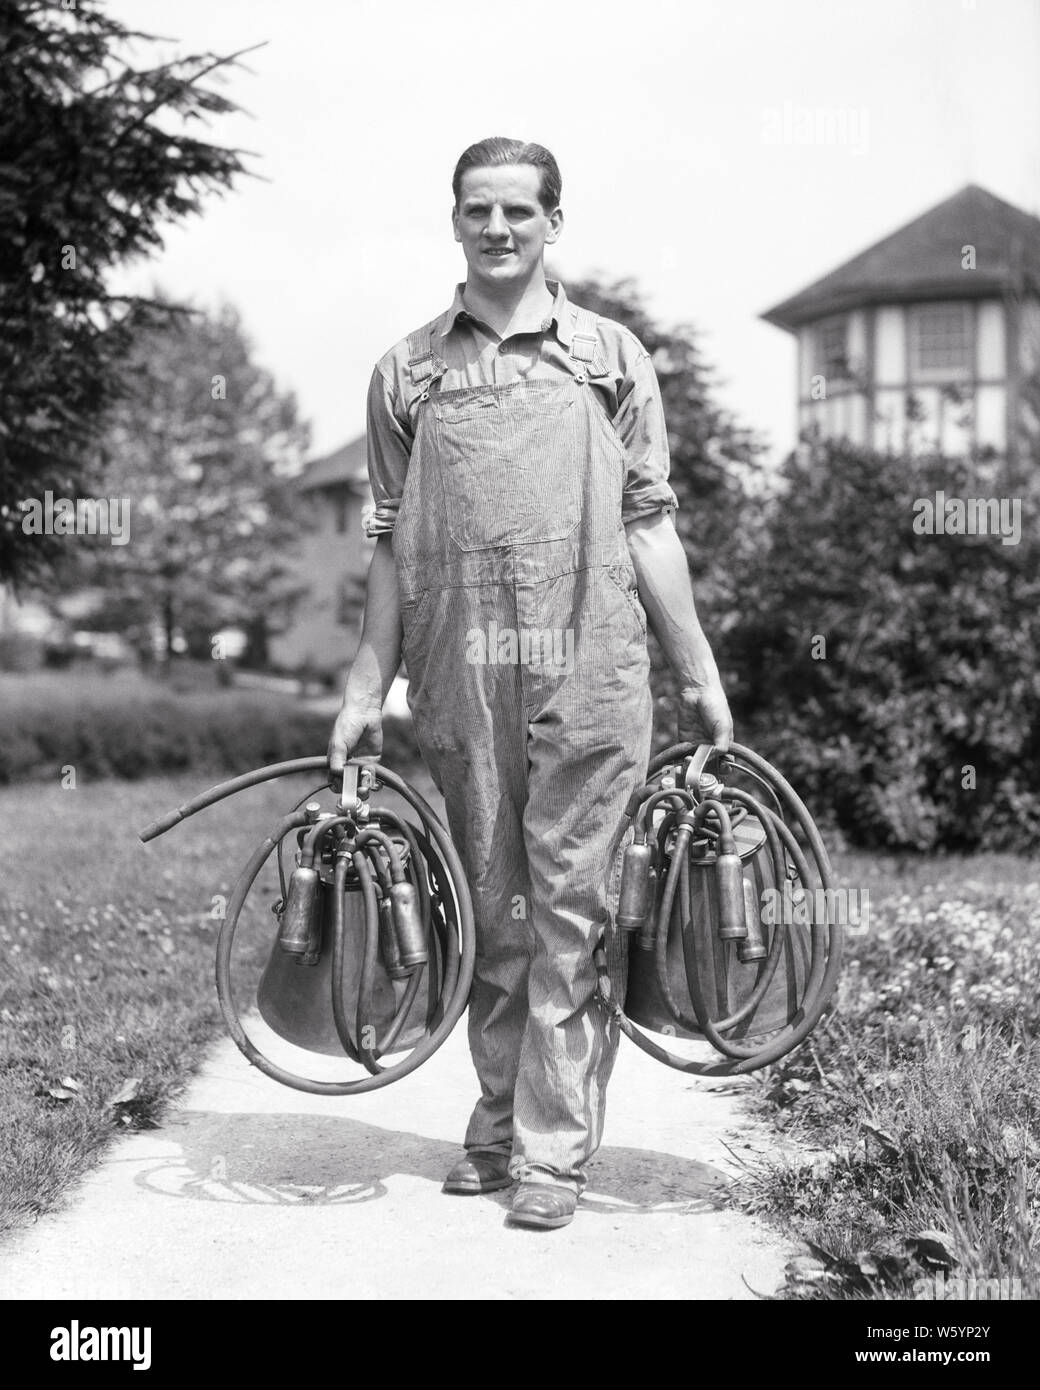 1920s 1930s SMILING MAN DAIRY FARMER WEARING OVERALLS WALKING TOWARD LOOKING AT CAMERA CARRYING TWO VACUUM MILKING MACHINES - d2516 HAR001 HARS DAIRY COPY SPACE FULL-LENGTH PERSONS OVERALLS FARMING MALES PROFESSION AGRICULTURE B&W EYE CONTACT SKILL OCCUPATION SKILLS CAREERS FARMERS PROGRESS TOWARD INNOVATION OCCUPATIONS CONCEPTUAL BAREHEADED MID-ADULT MID-ADULT MAN BLACK AND WHITE CAUCASIAN ETHNICITY HAR001 OLD FASHIONED Stock Photo